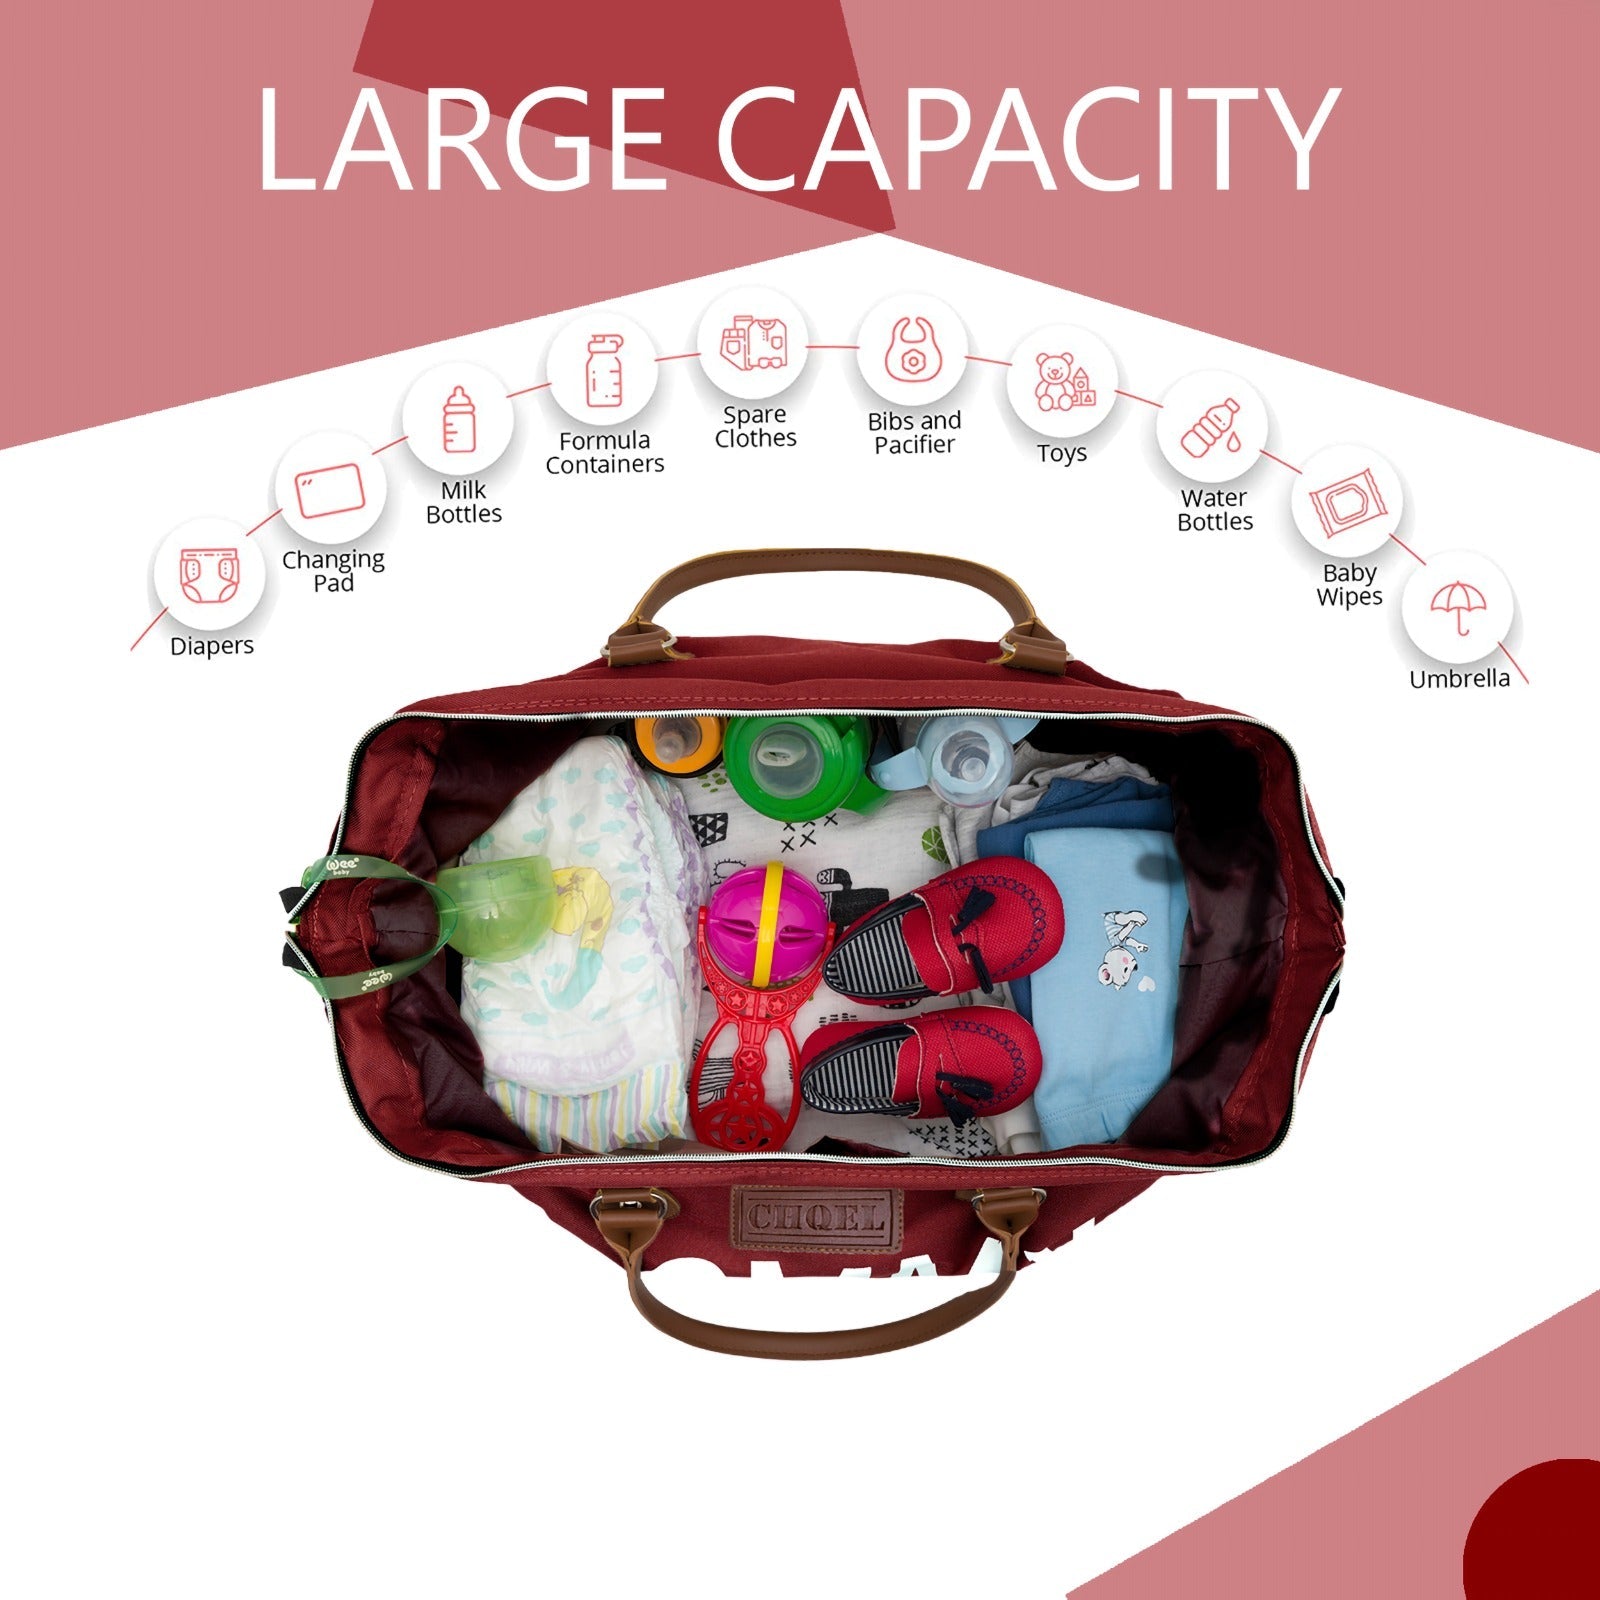 2 Diaper Bags, Organizer Bags, Travel Changing Pad With Wipe